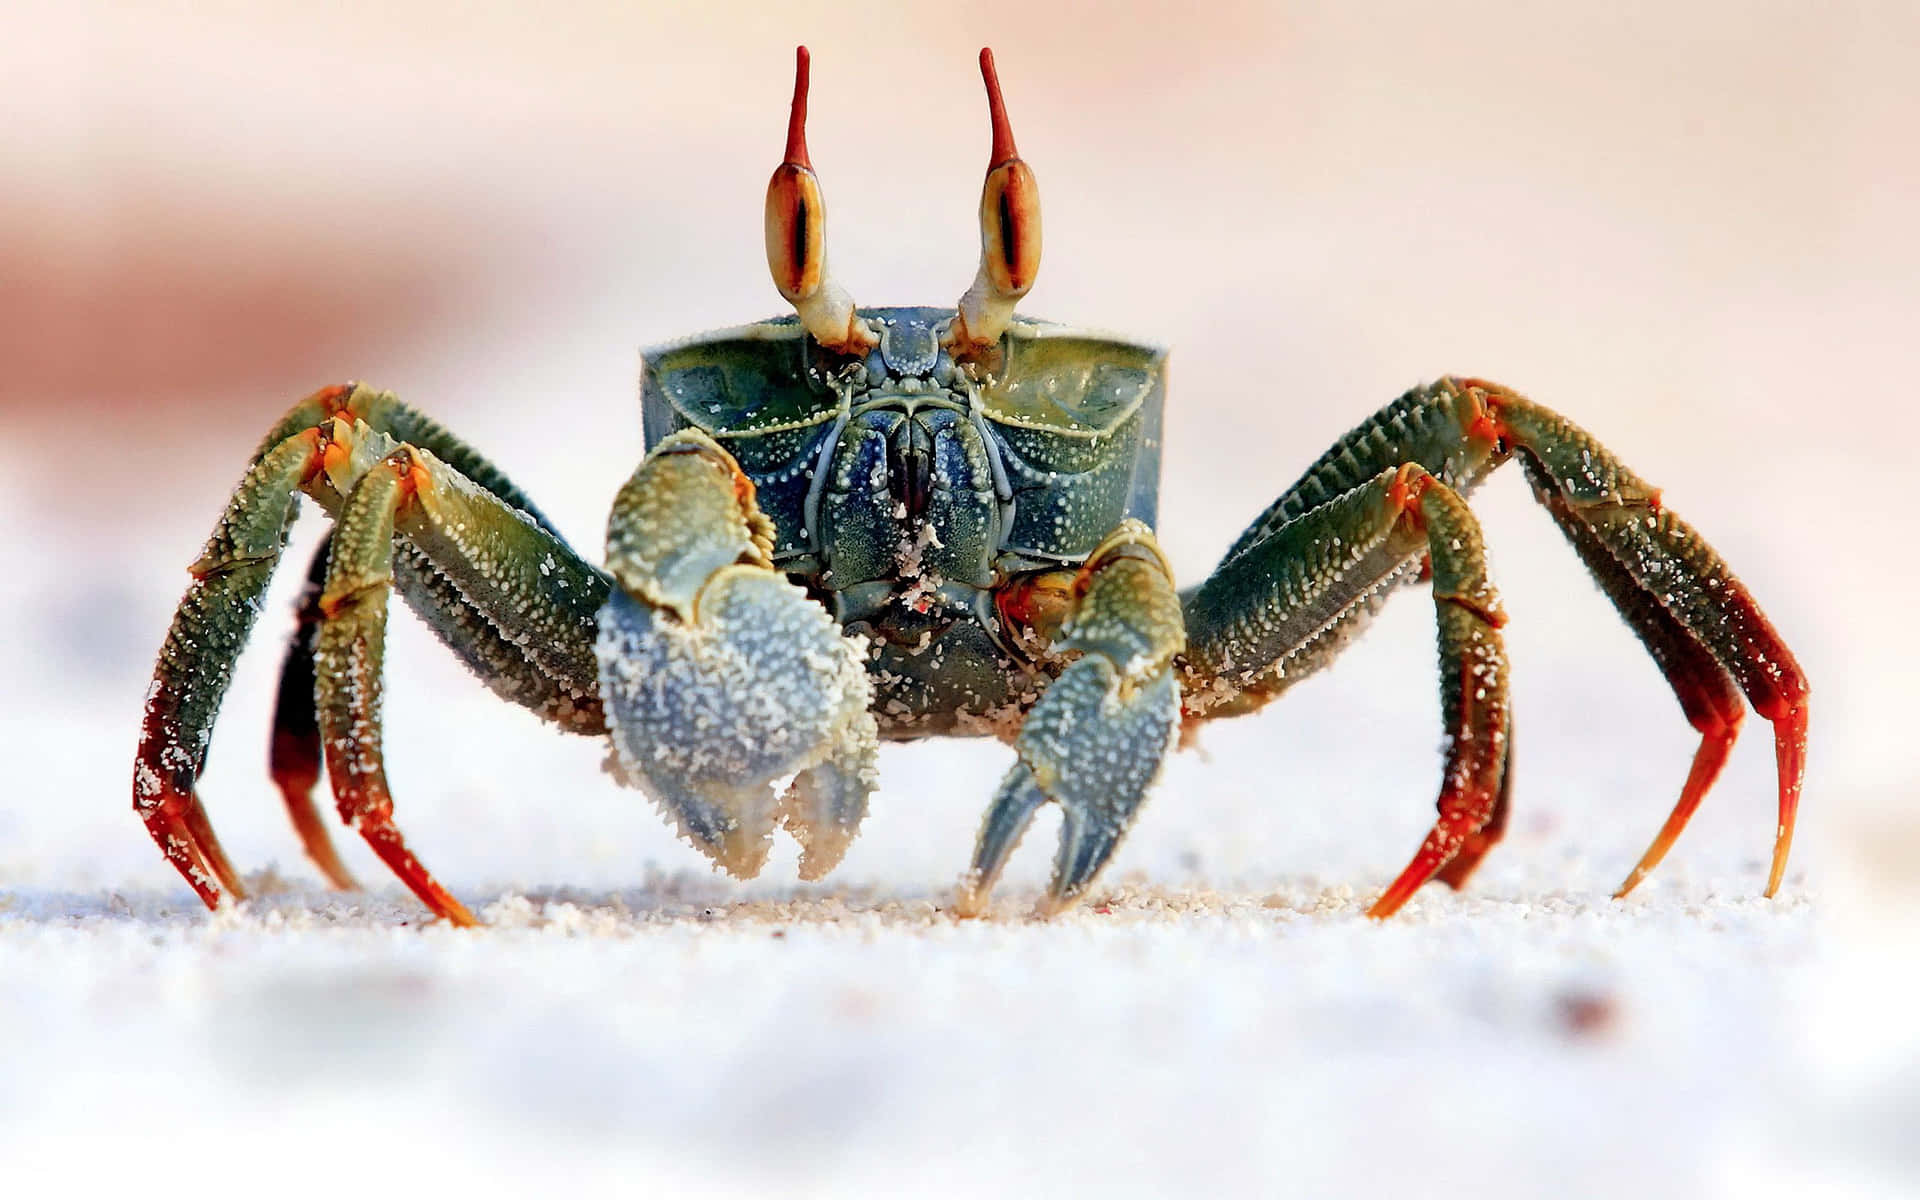 A Crab With Long Legs Walking On The Sand